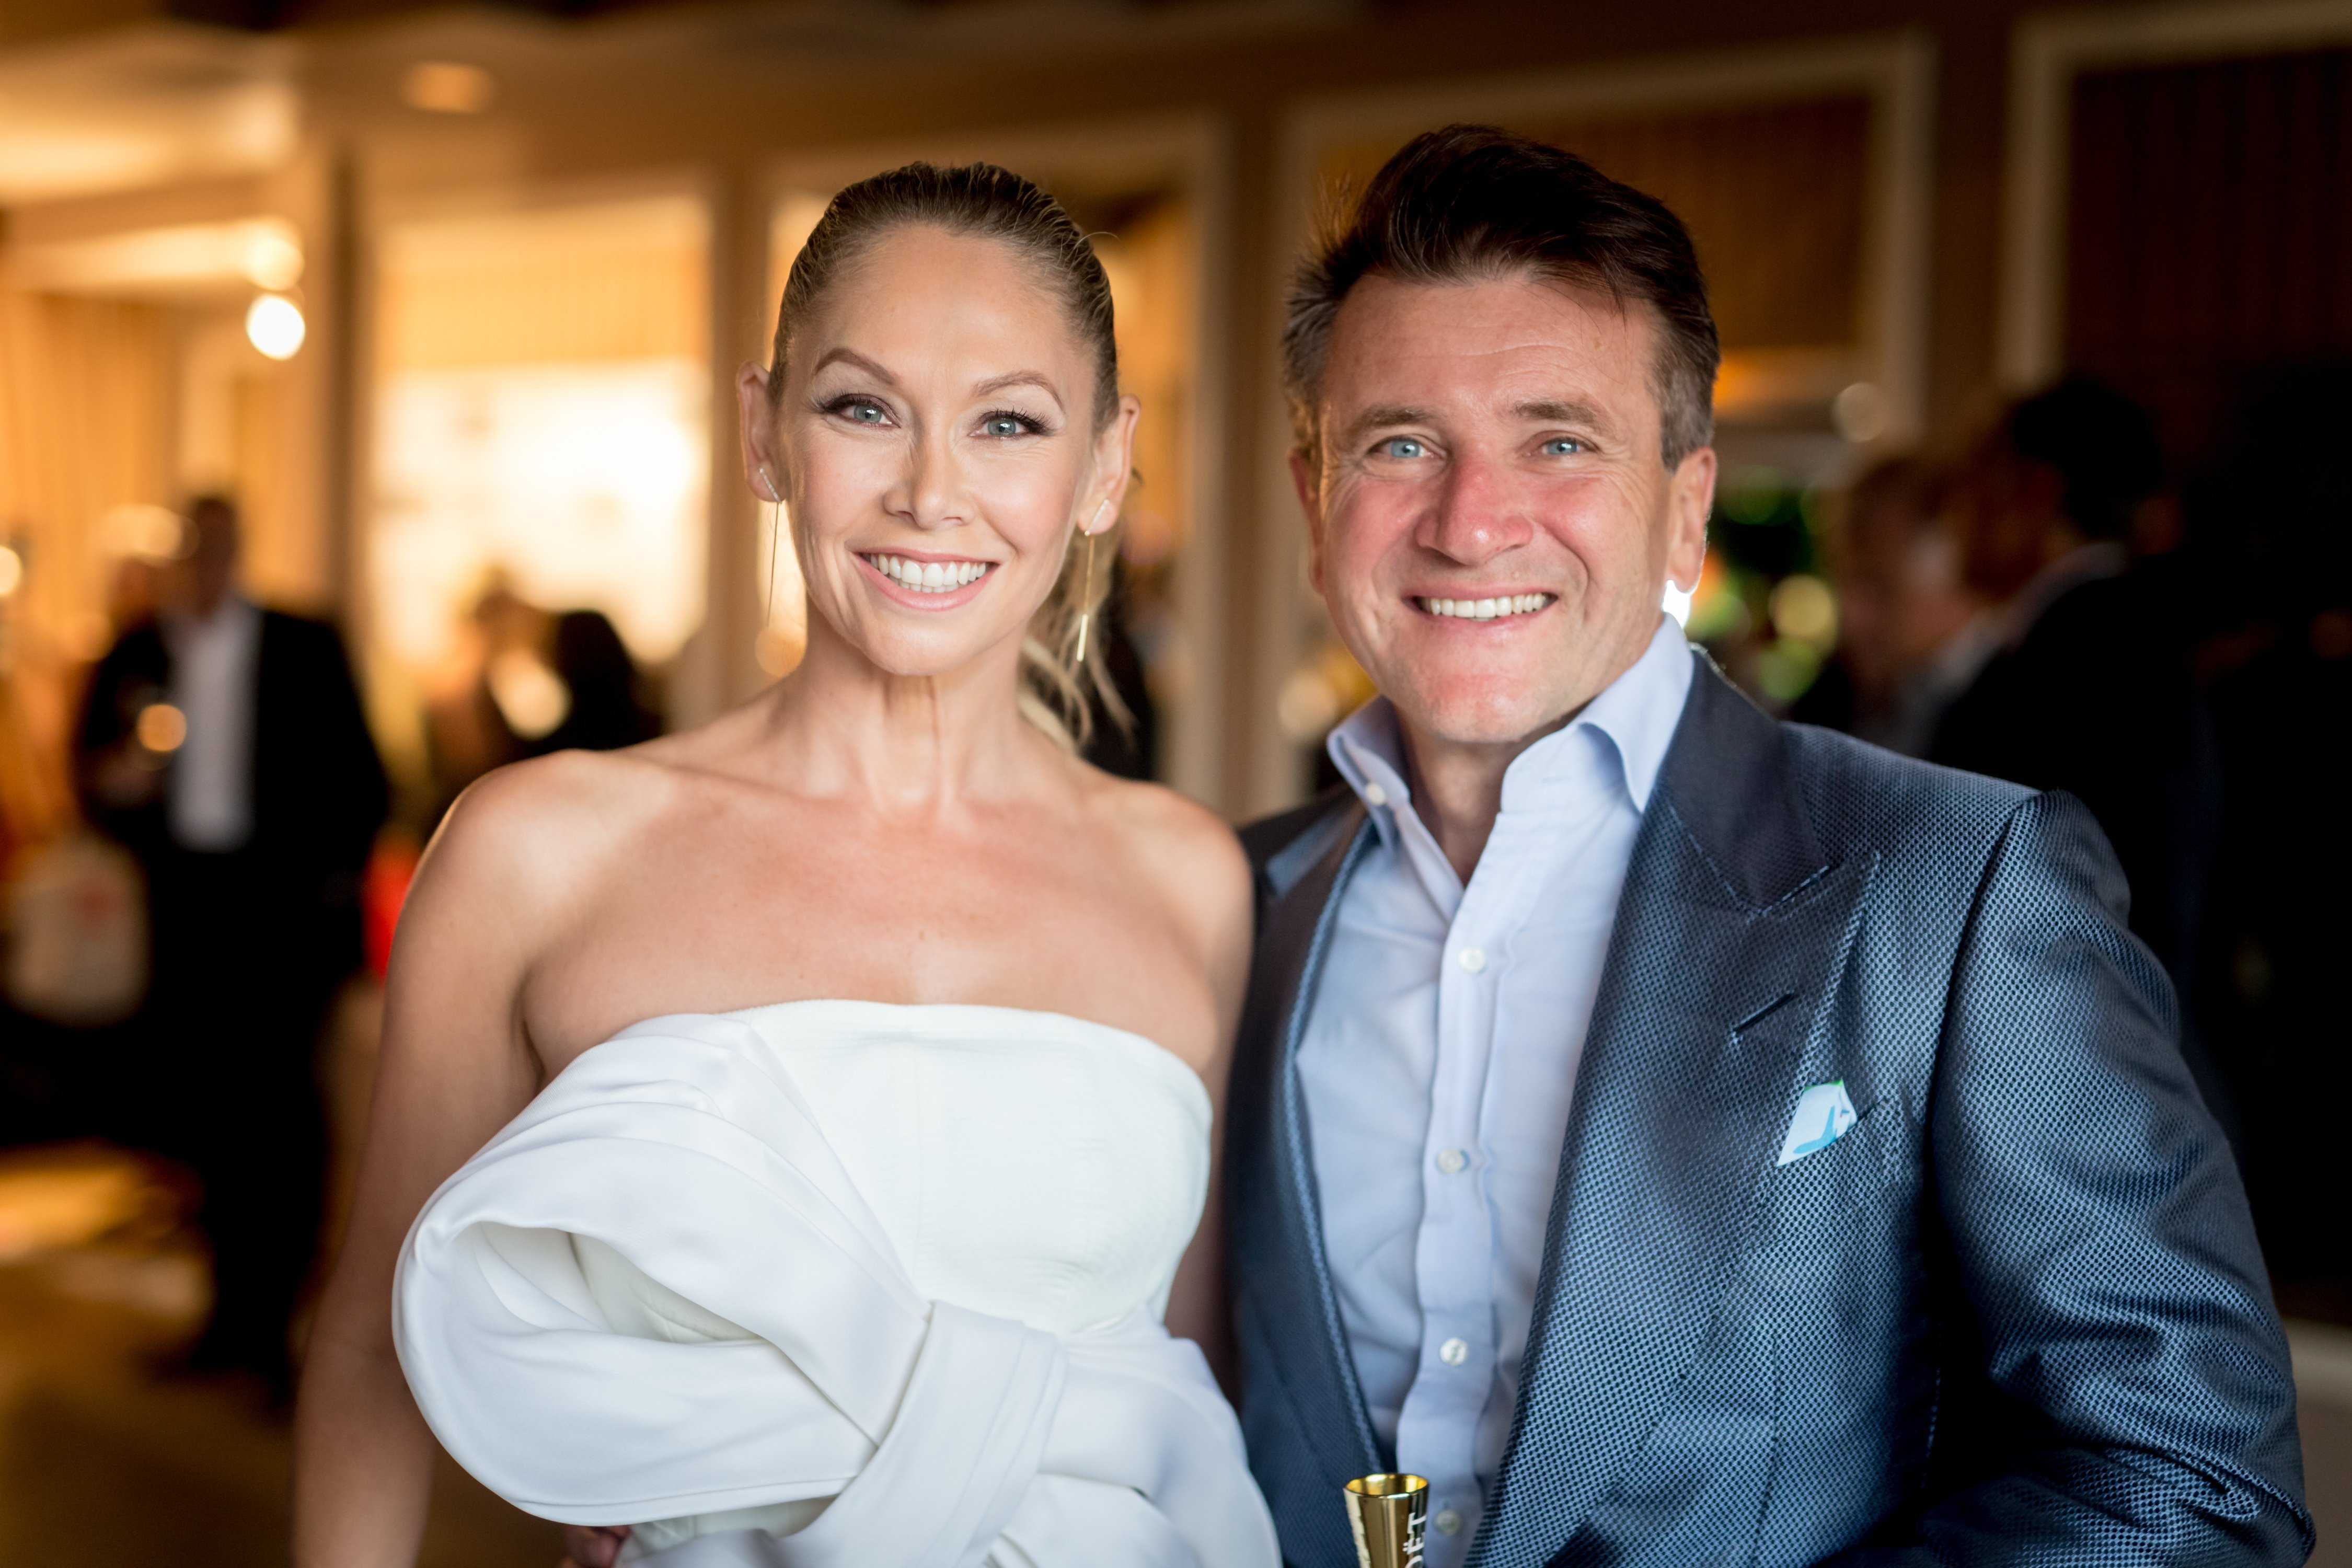 Kym Herjavec and Robert Herjavec attend the Television Industry Advocacy Awards on September 16, 2016 | Photo: Getty Images